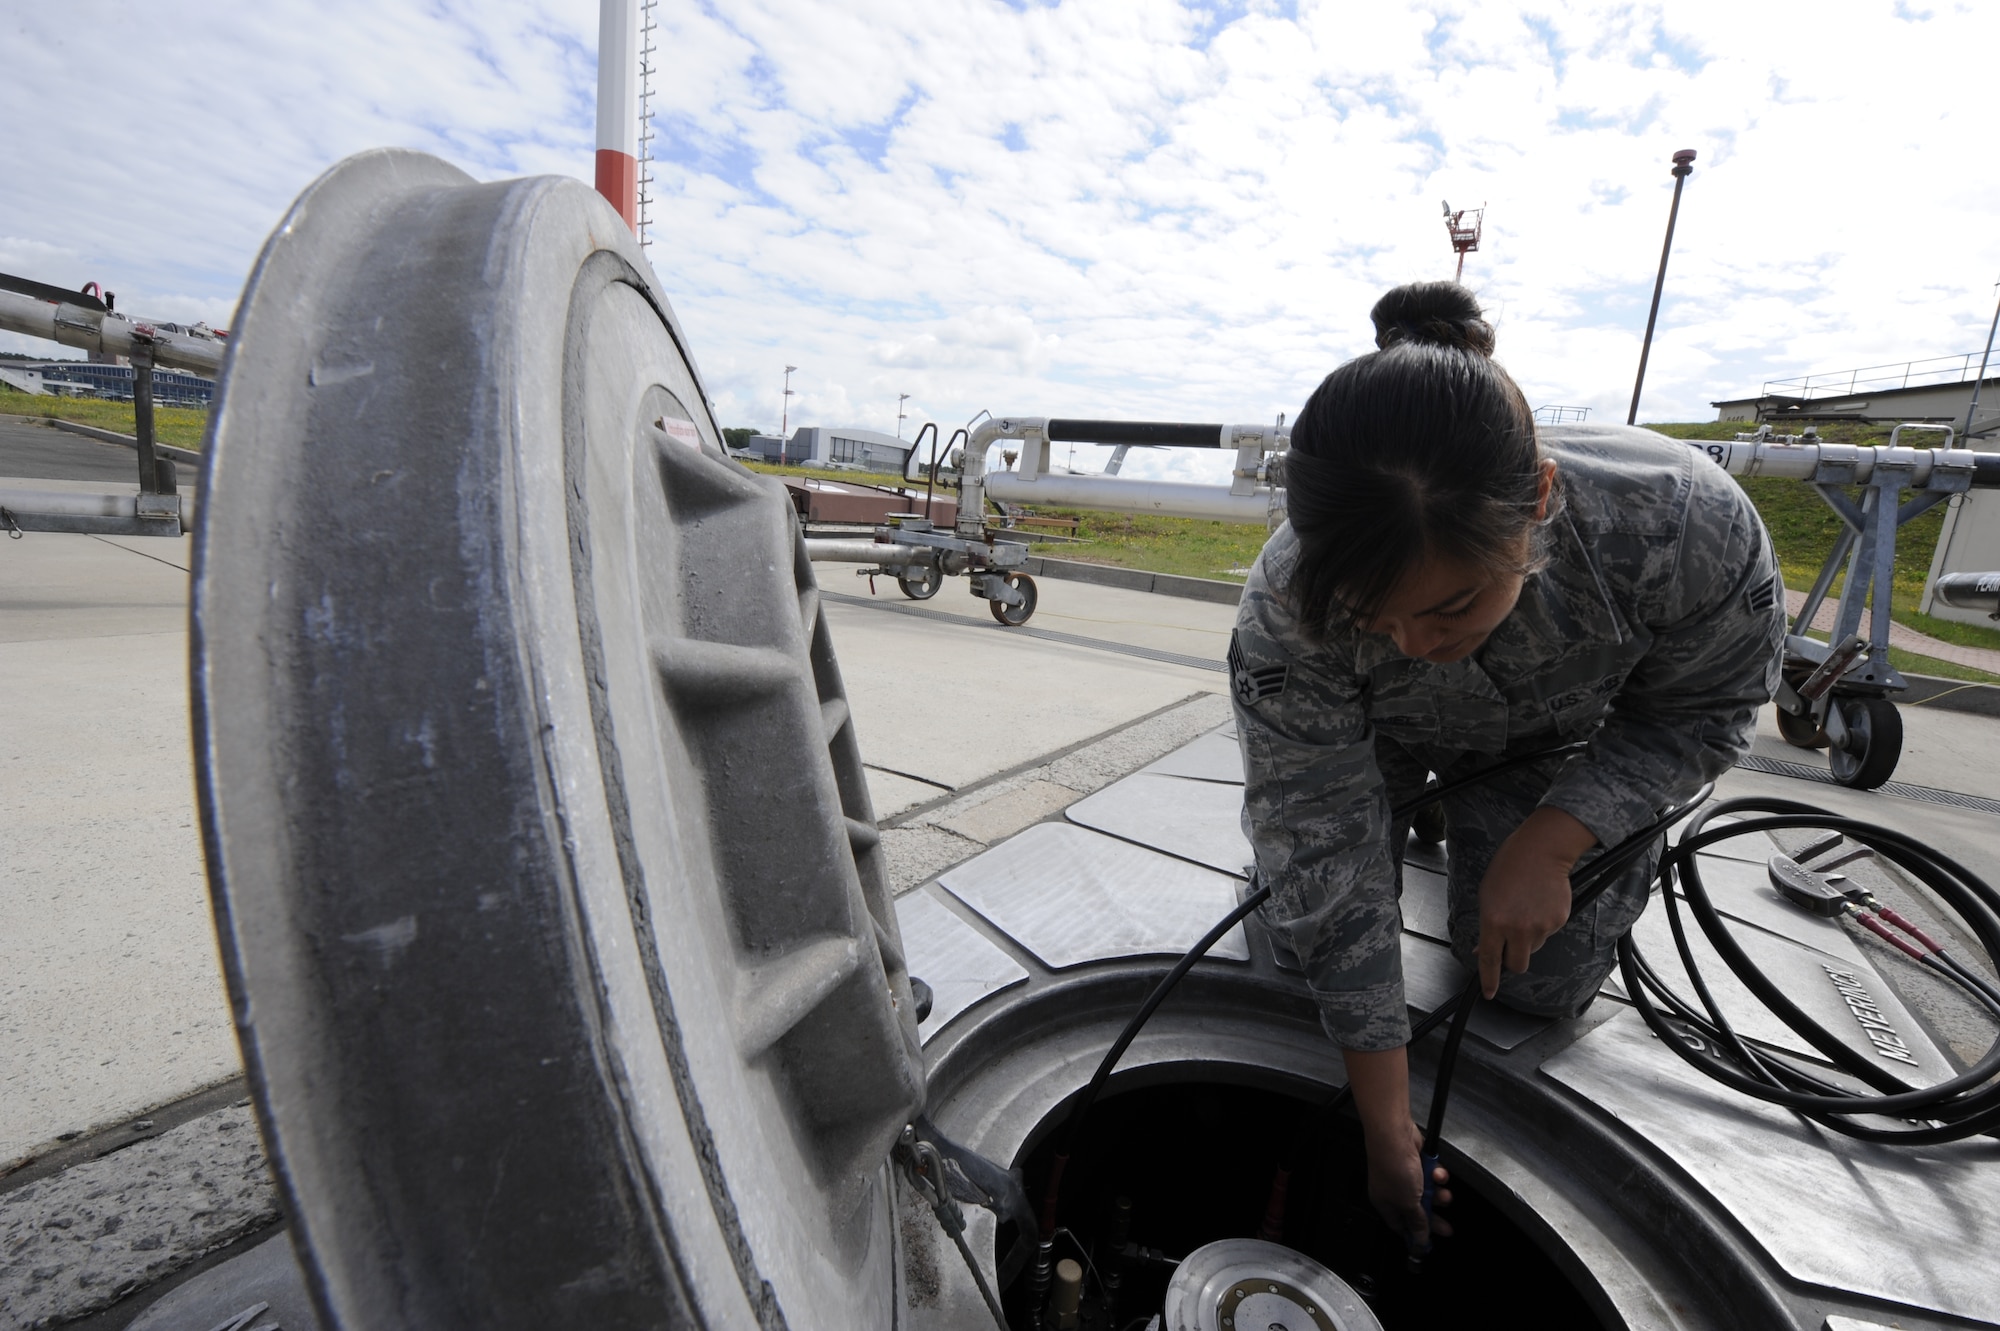 Senior Airman Janine Trammel, 86th Logistics Readiness Squadron fuels technician, opens a fuels pit to prepare for a refuel on Ramstein Air Base, Germany, July 10, 2012. Fuels help support the mission by continuously providing quality grade jet fuel. (U.S. Air Force photo/ Senior Airman Aaron-Forrest Wainwright)